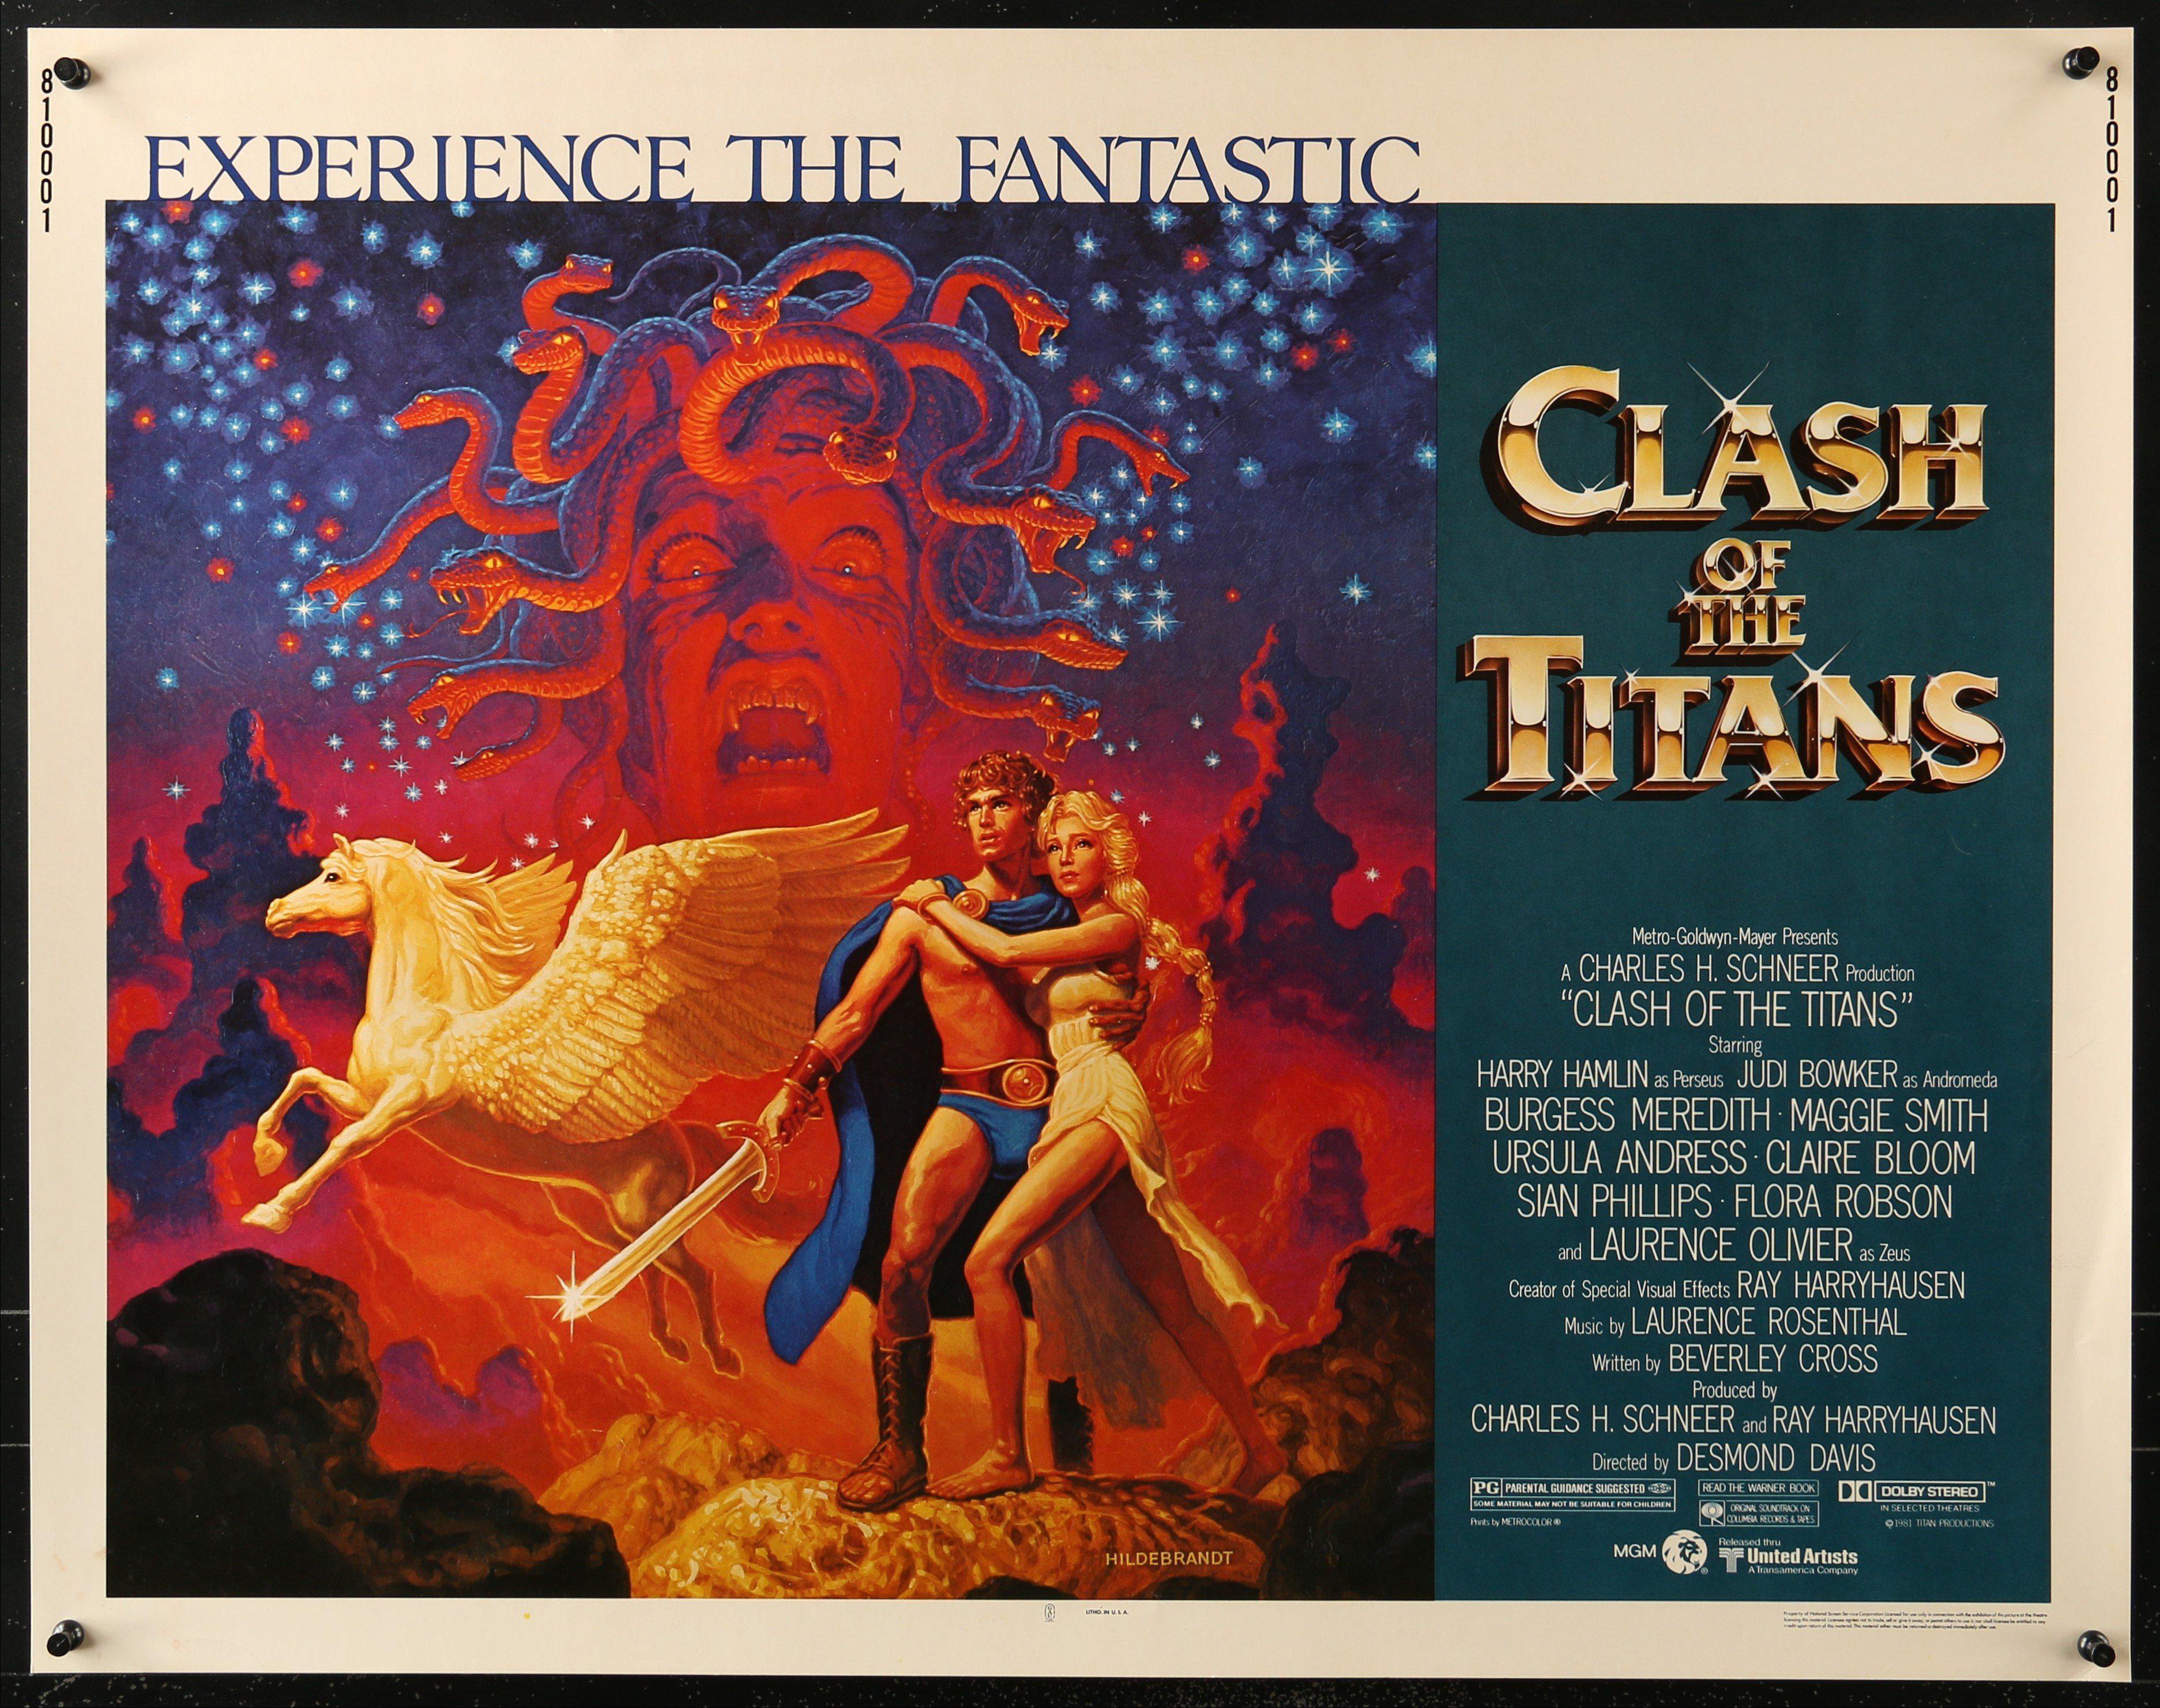 Clash of the Titans Movie Poster 1981 1 Sheet (27x41)